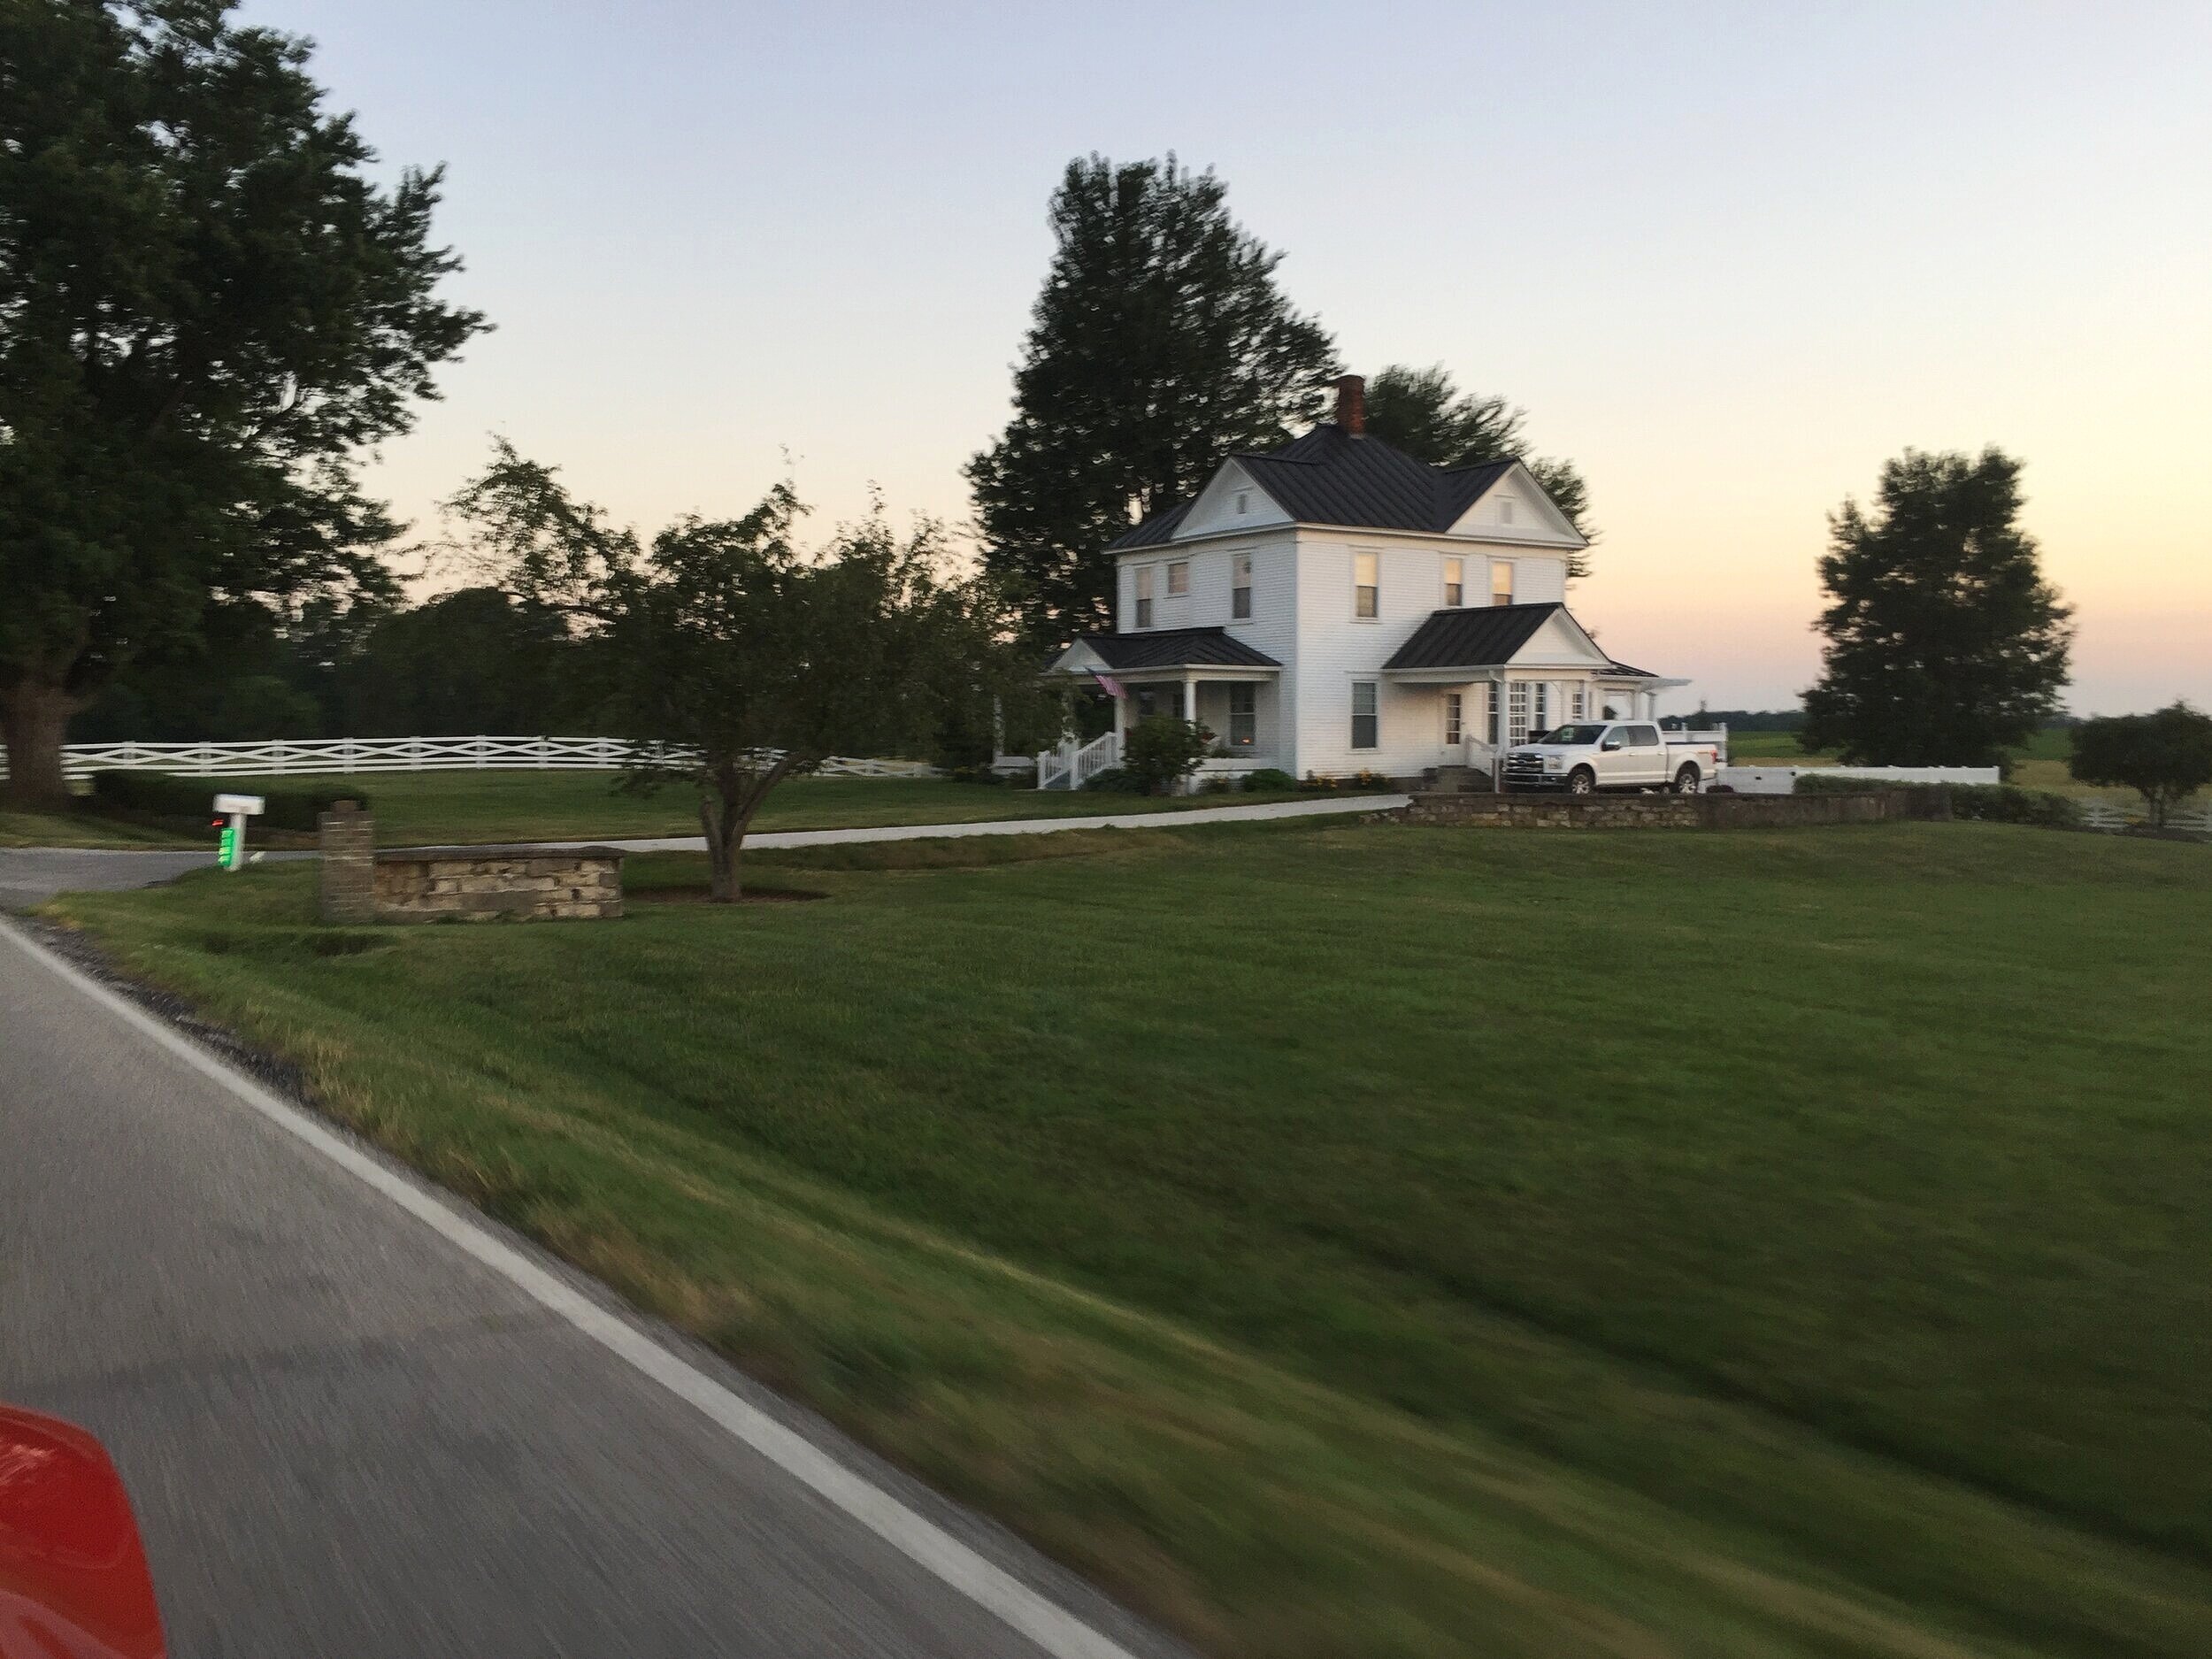  The farmhouse of James Dean’s aunt &amp; uncle, where he grew up in Fairmount, IN.  Photo ©2019 Jill and Roger Pingleton. 